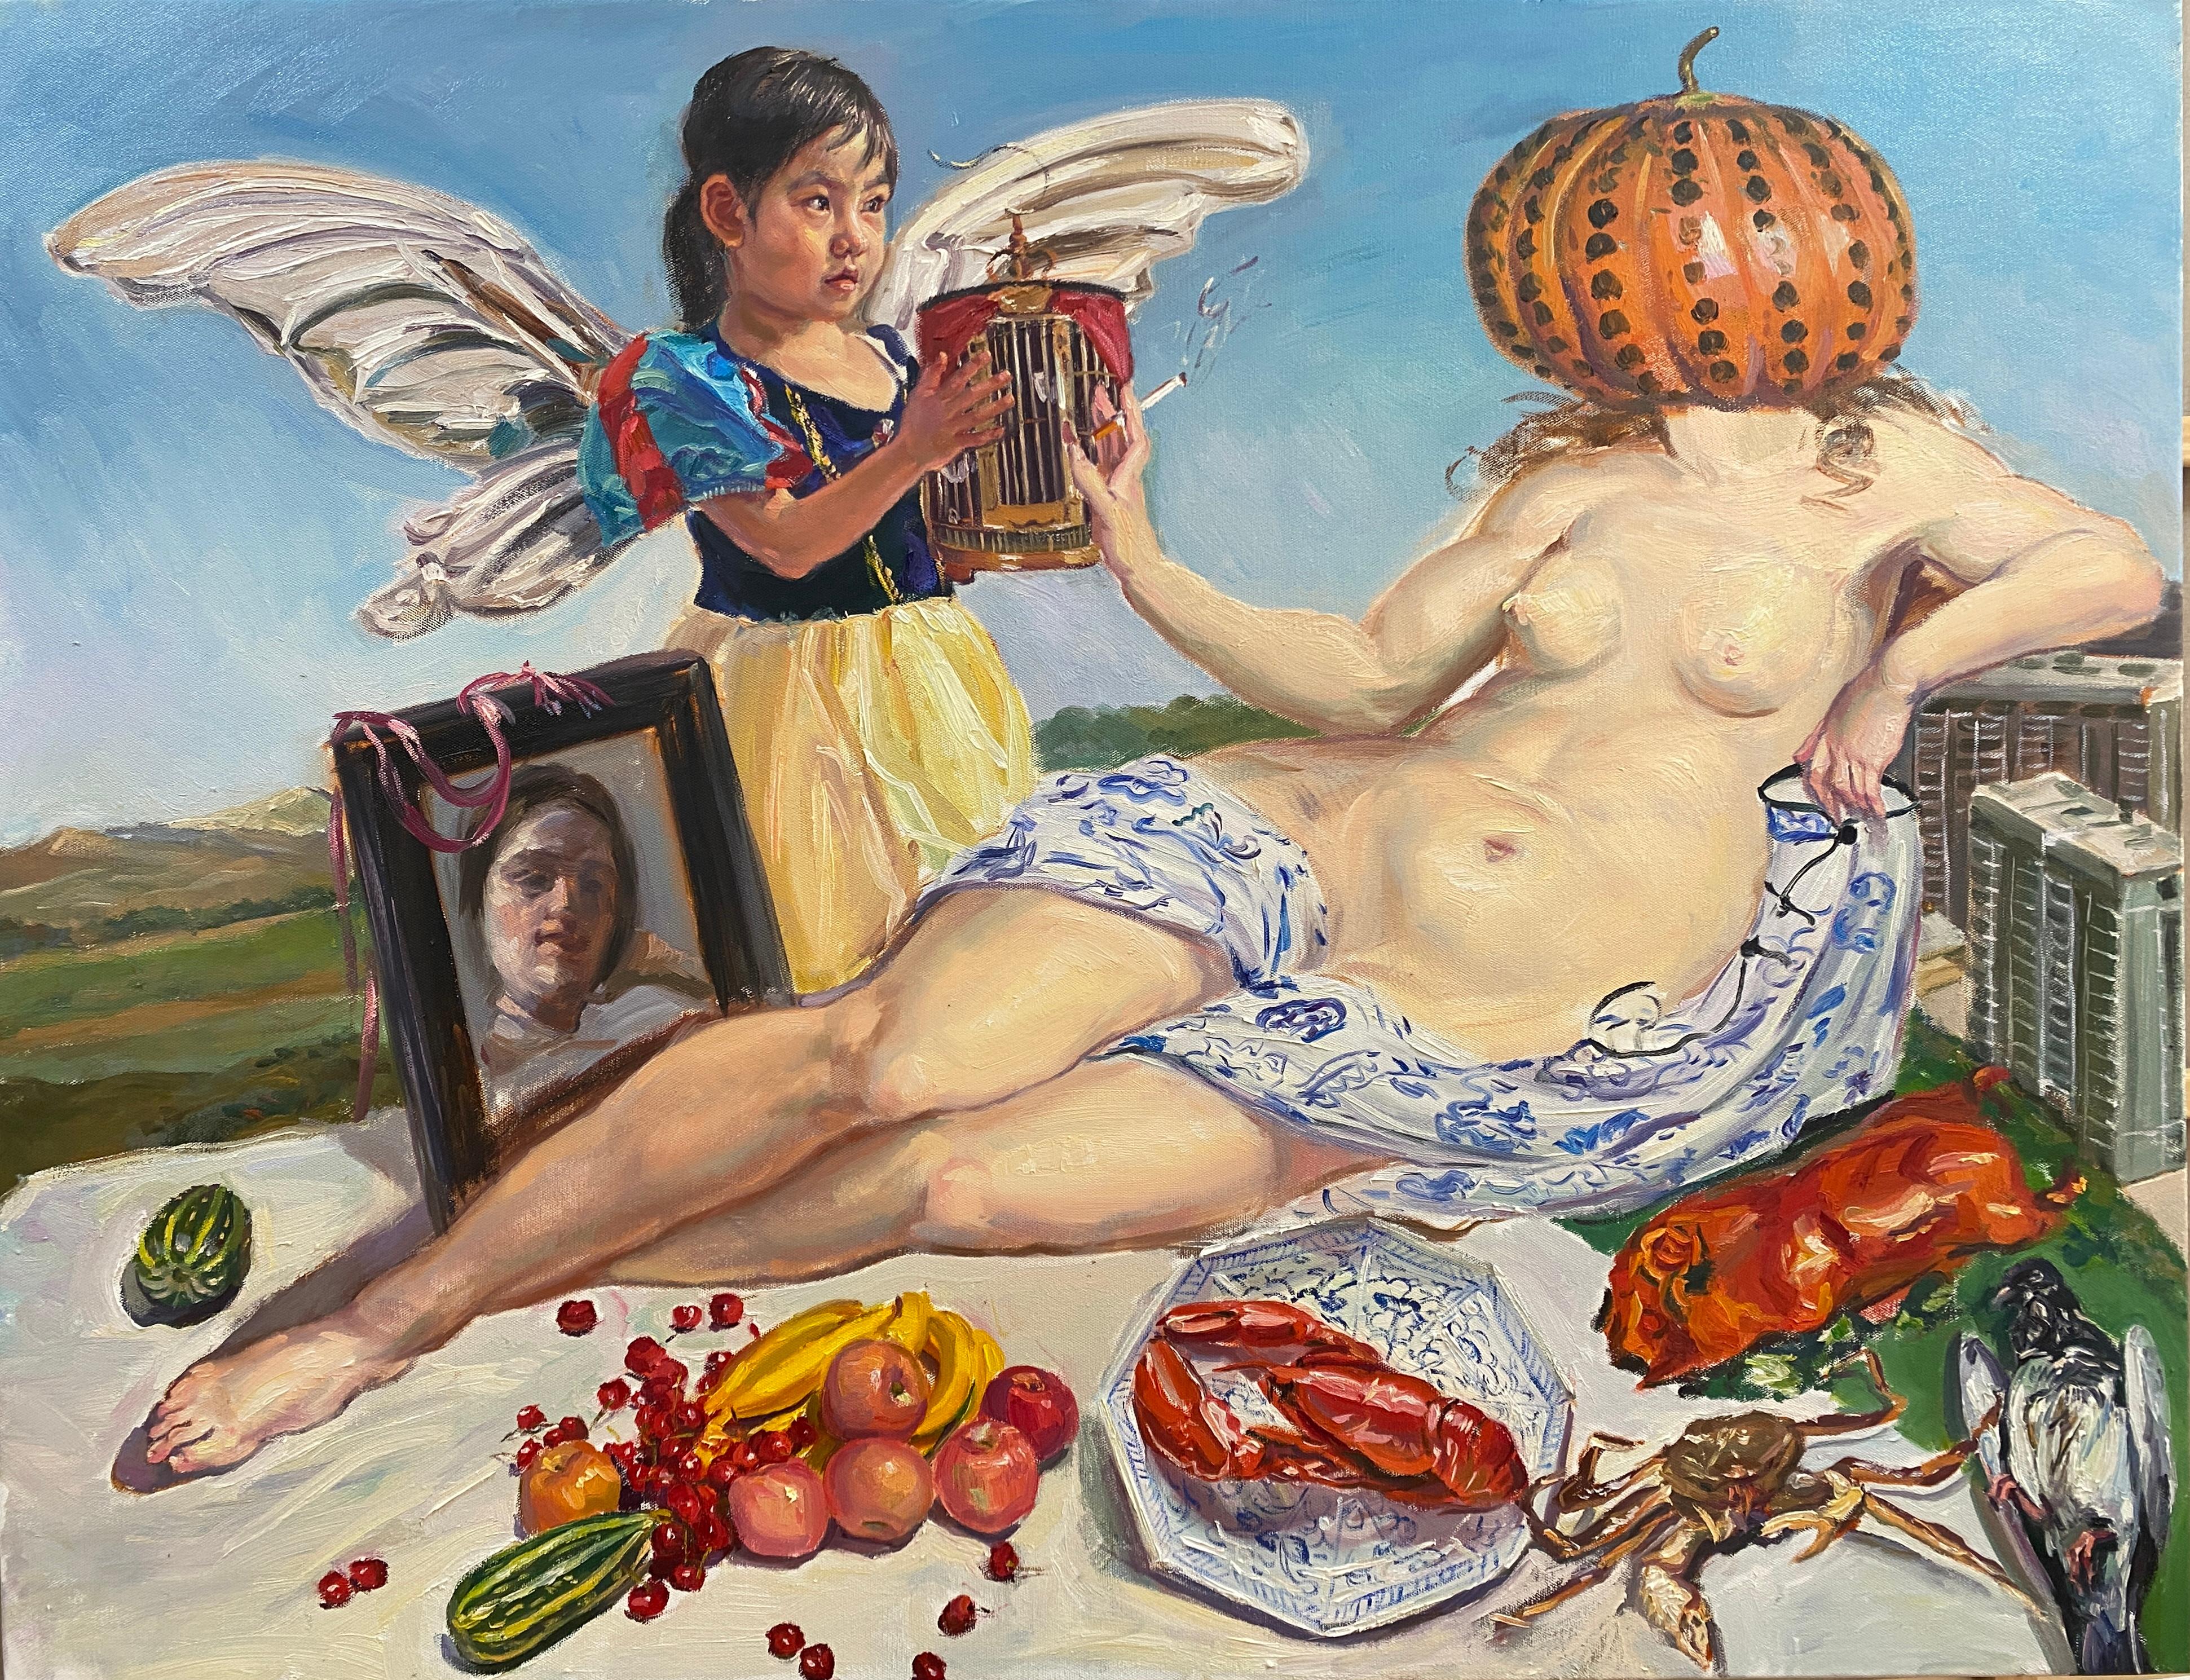 Oil on canvas

Su Yu is a Chinese artist born in 1987 who lives & works in Beijing in China. He was an old student of prestigious art teachers as Shi Liang & Chen Danqing at Oil Painting Institute in Beijing.

This painting reminds us of Venus in